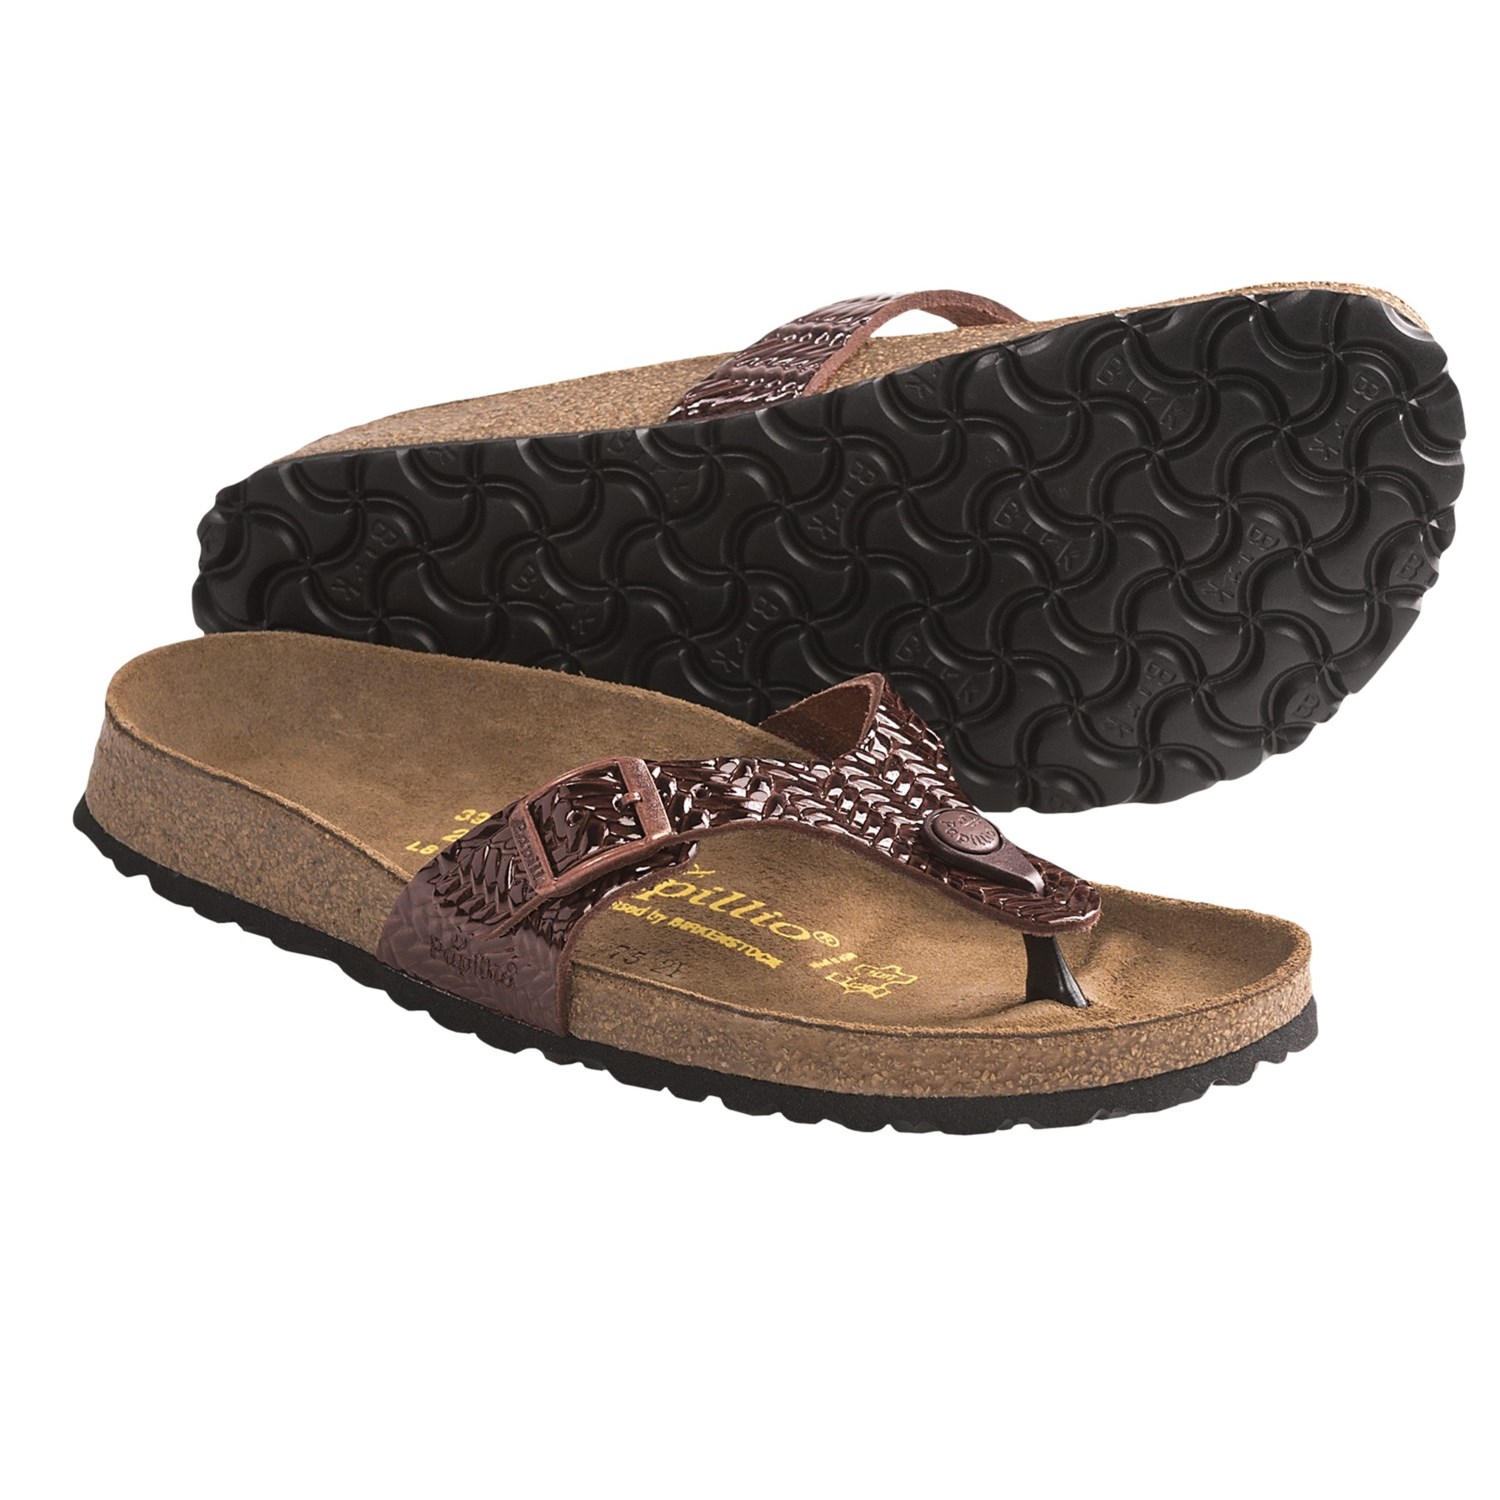 Papillio by Birkenstock Turin Sandals - Printed Leather (For Women) in ...